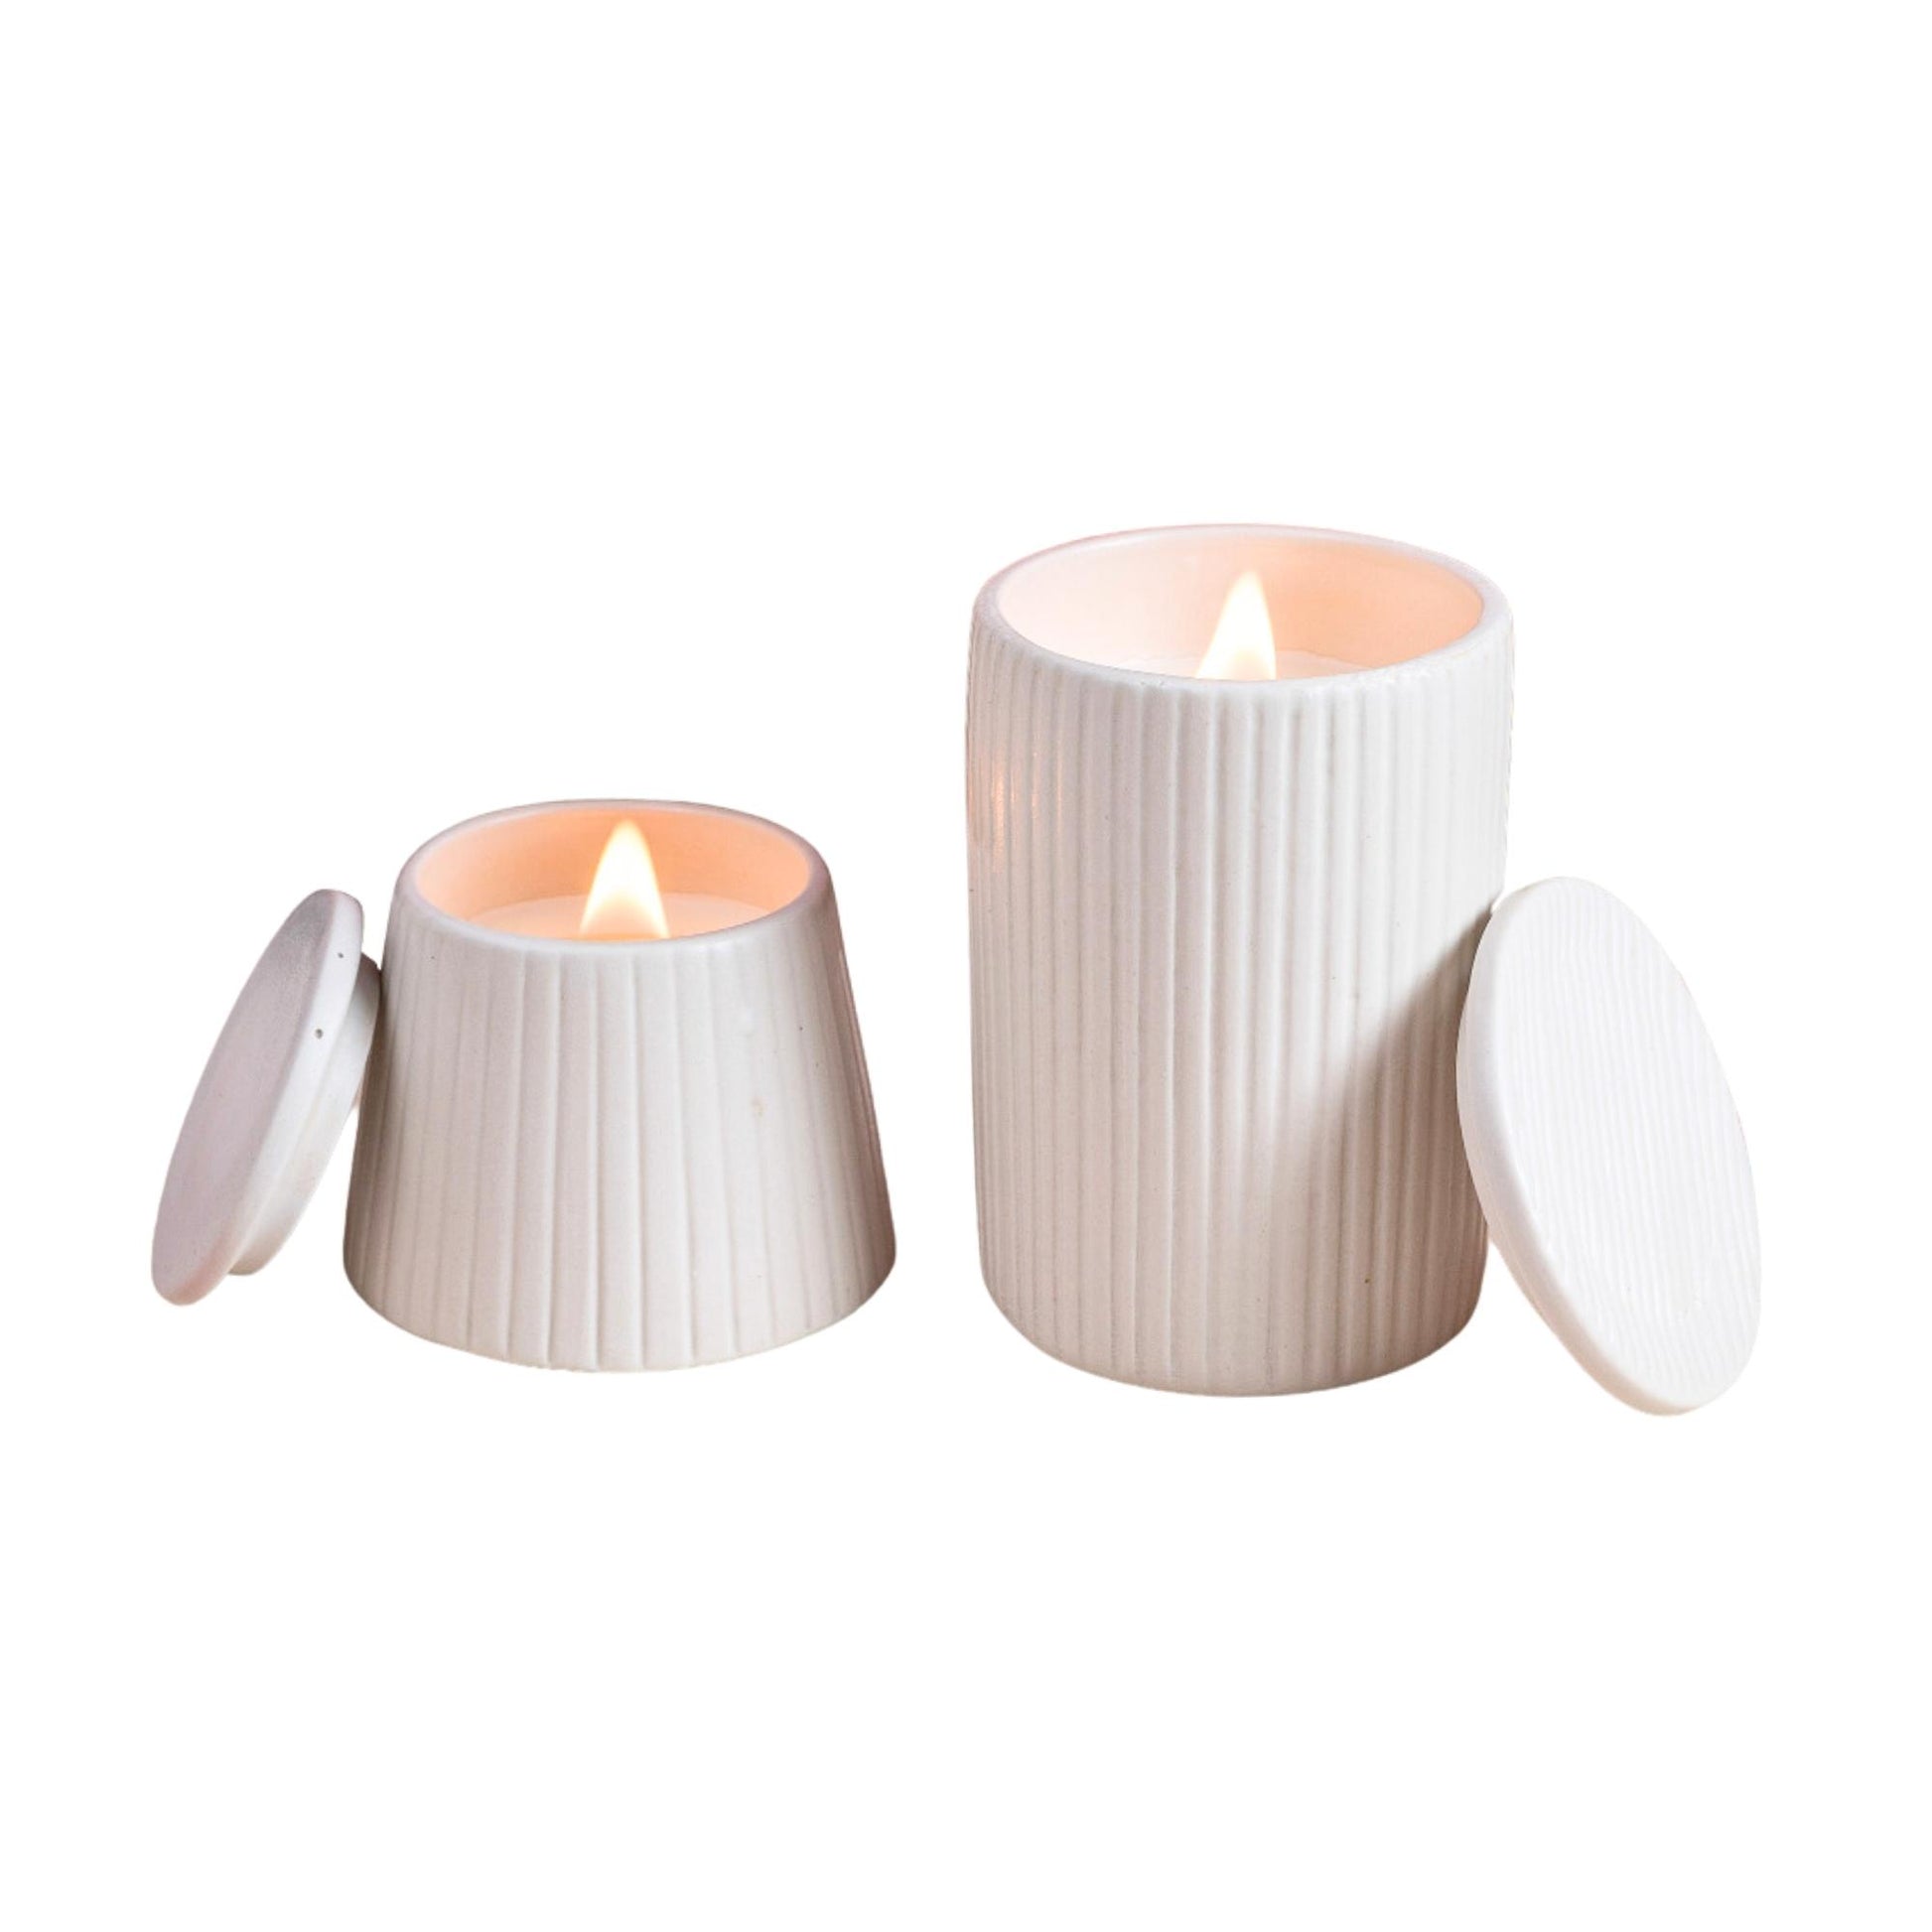 Frosting Jar: Refillable Luxury Candle